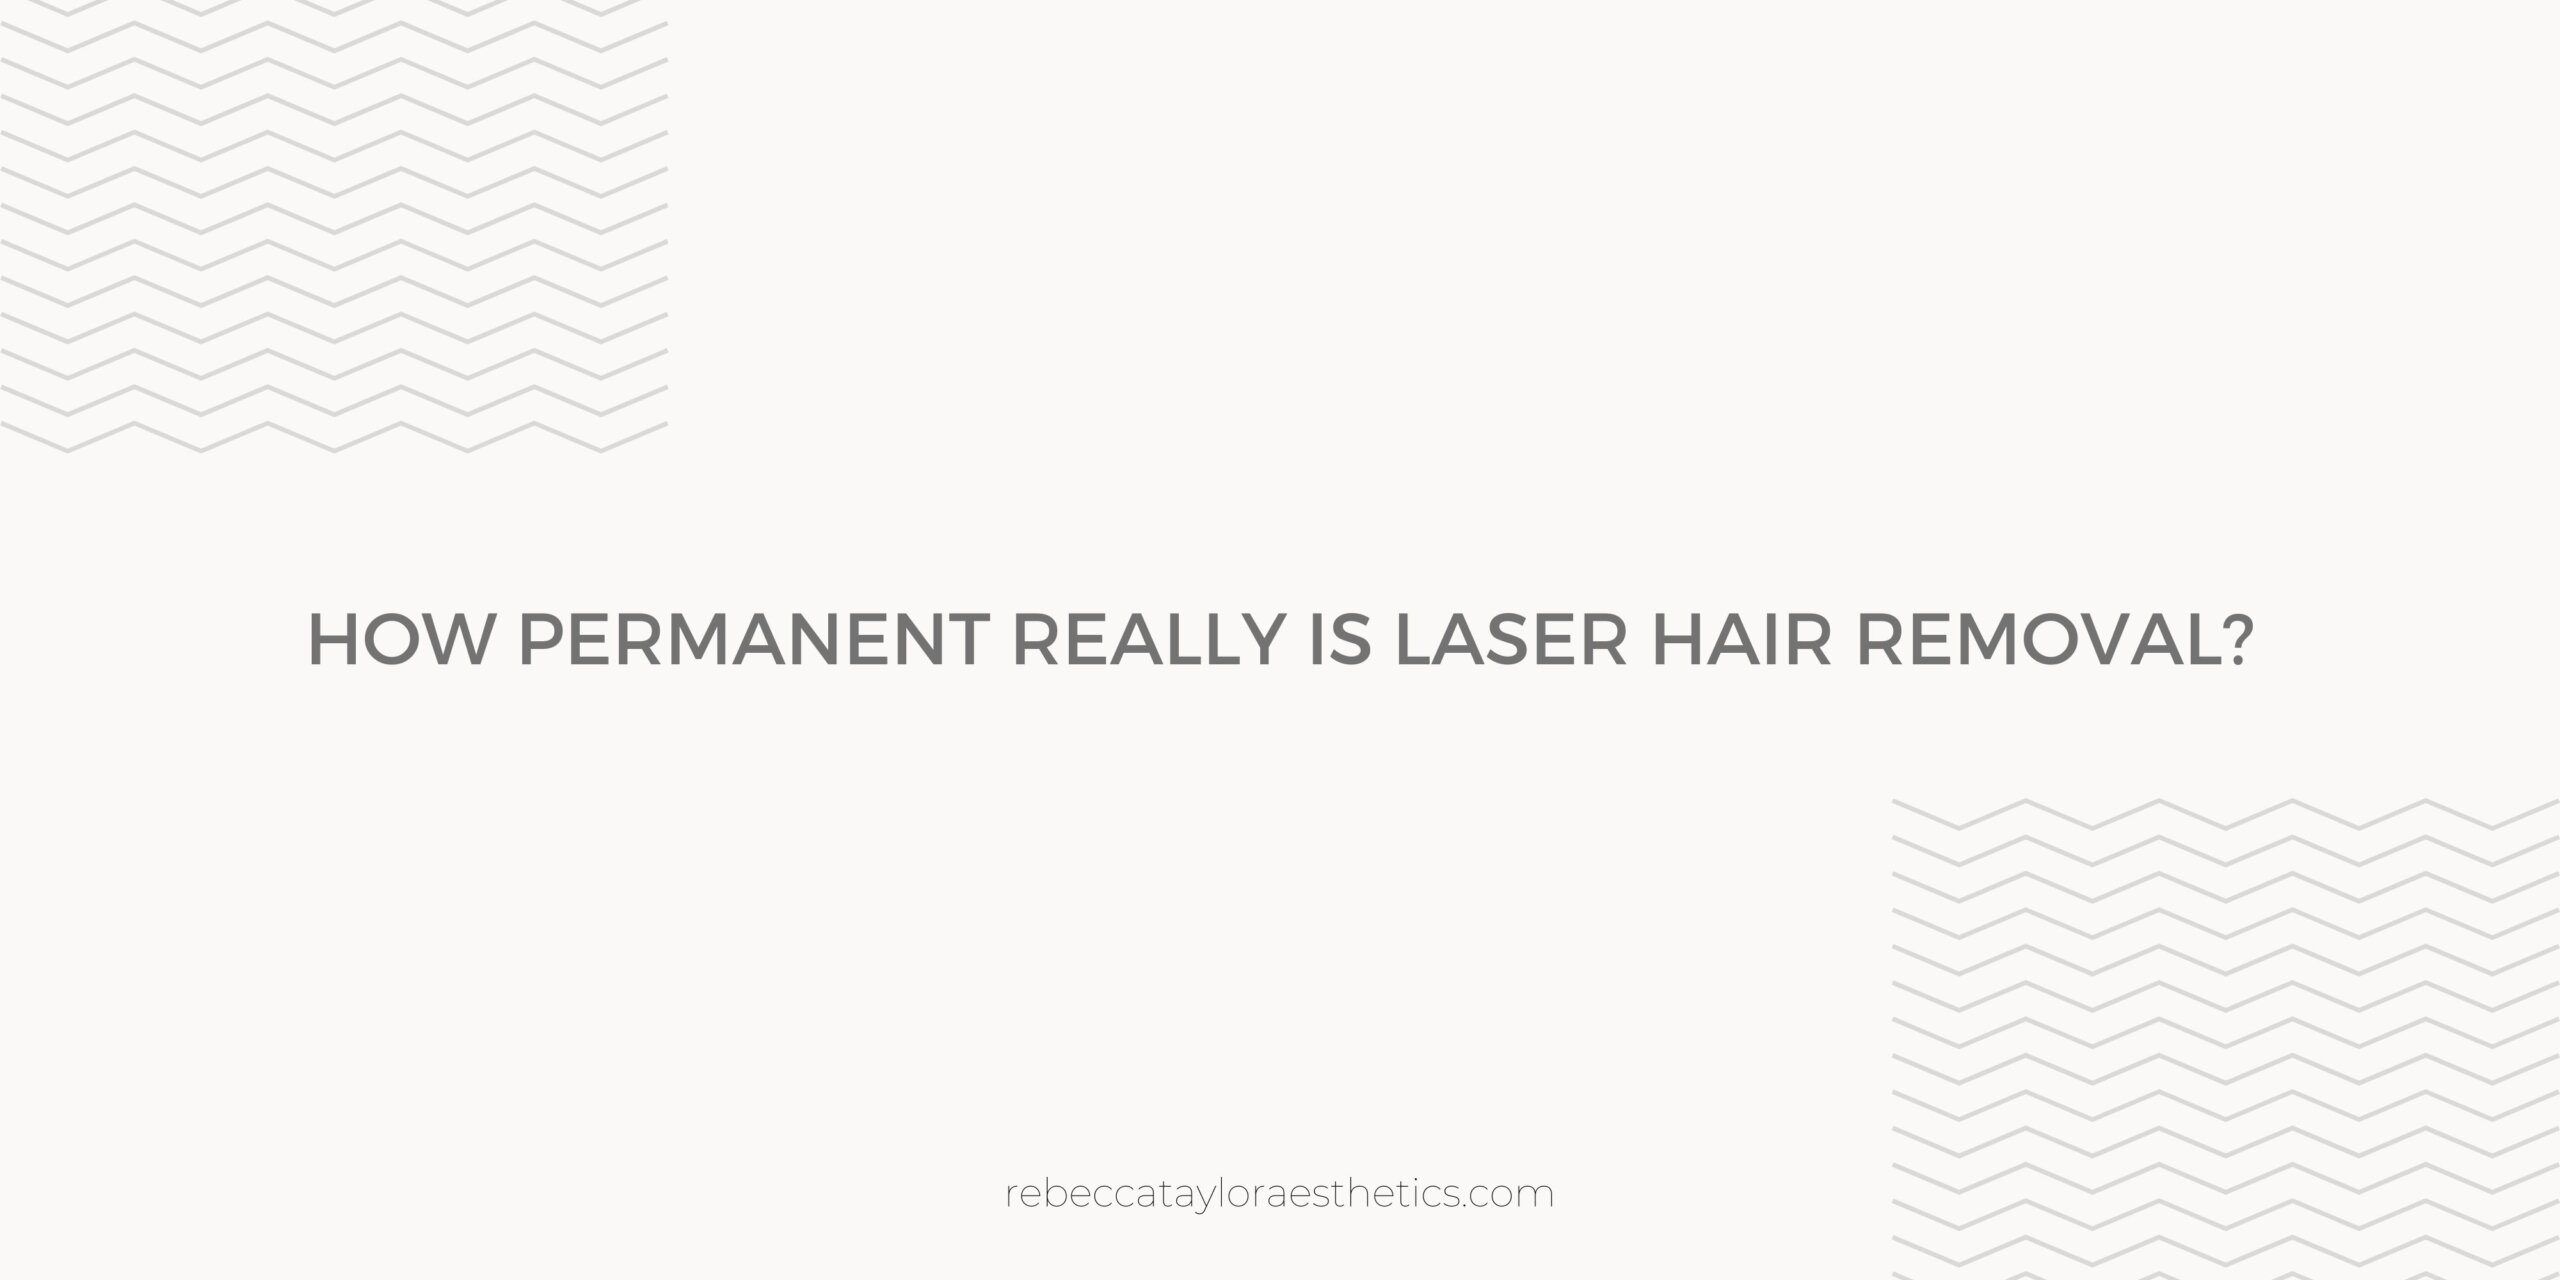 Header graphic asking how permanent laser hair removal can be